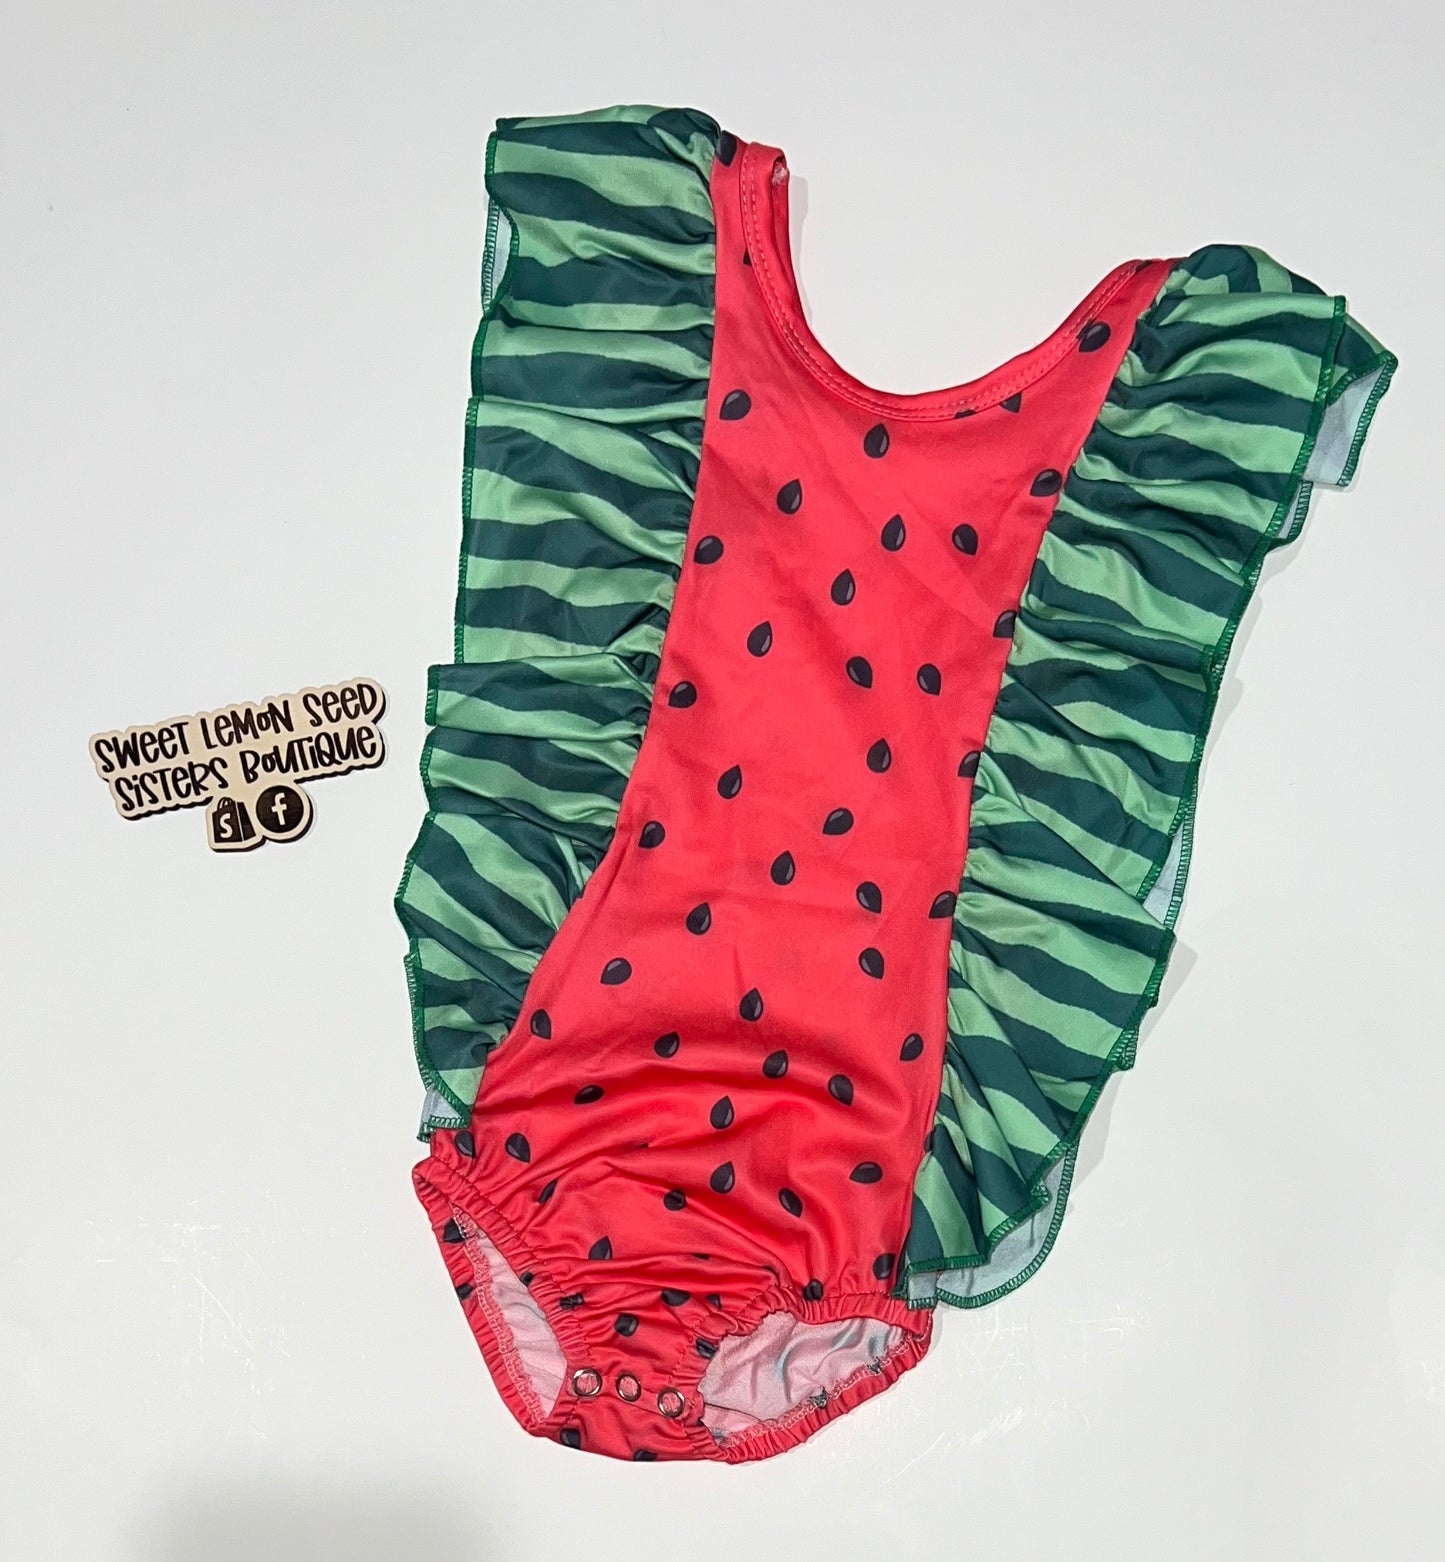 Watermelon suit (two pc & one pc)